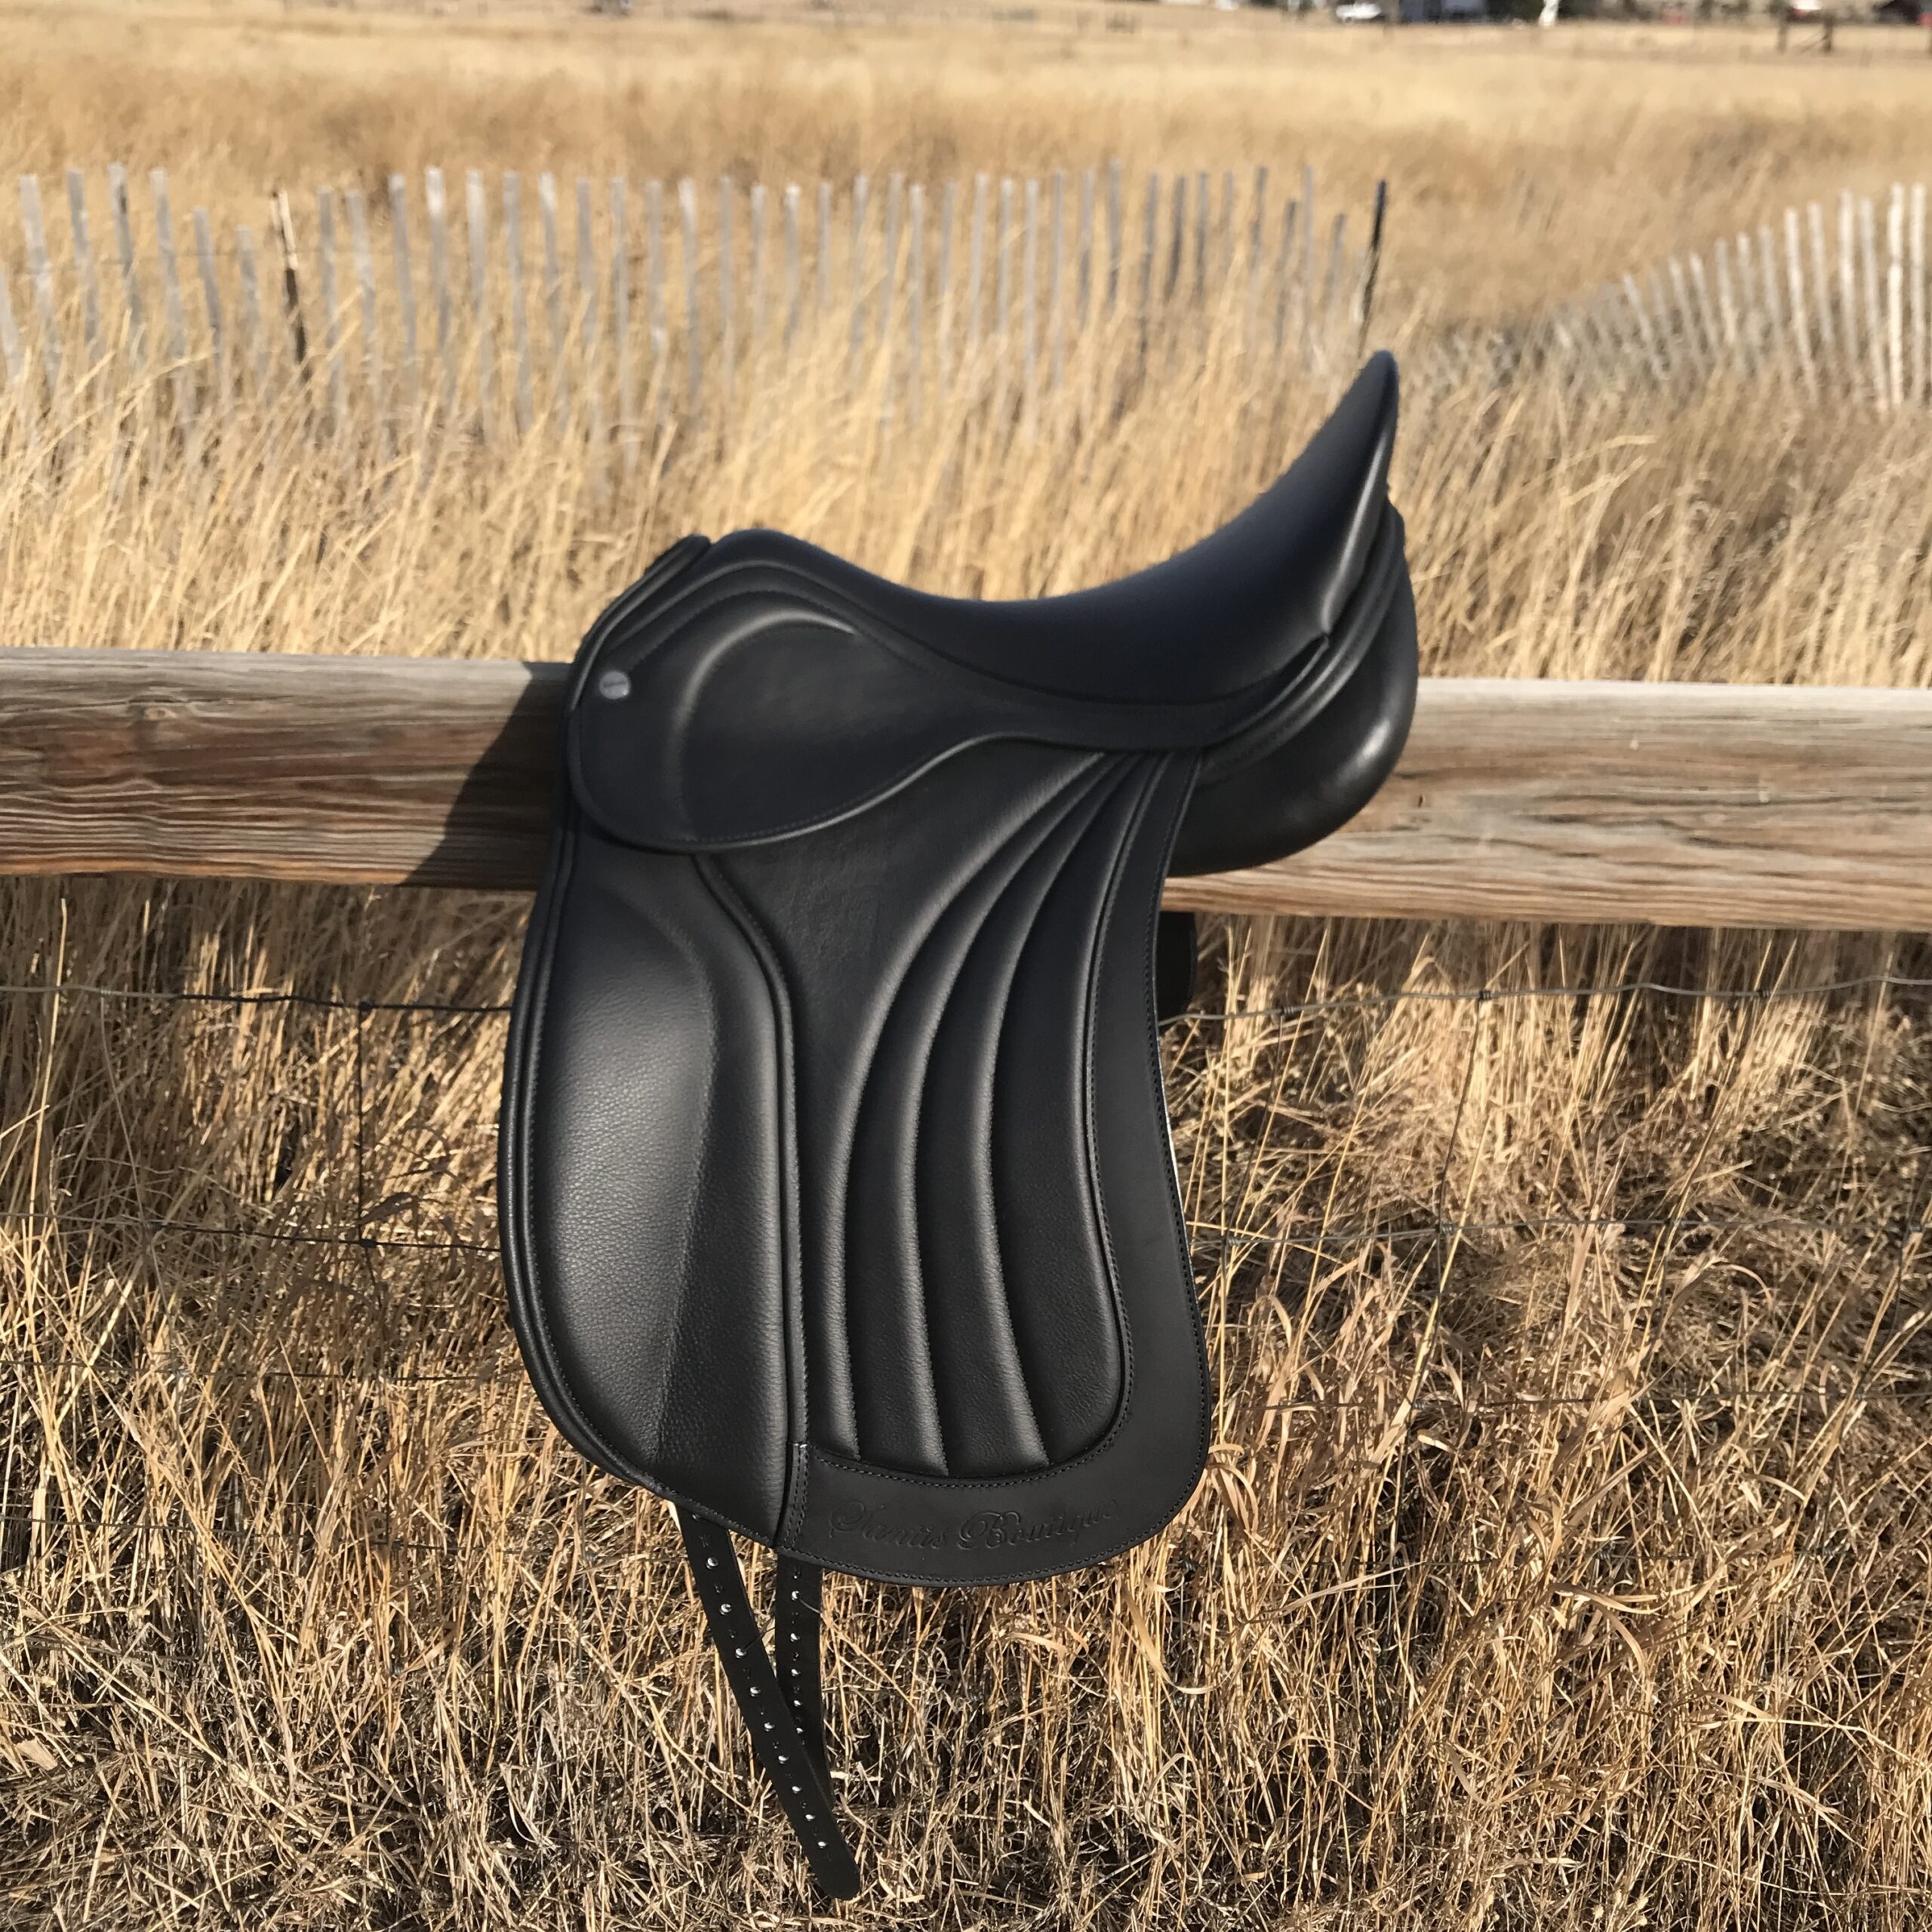 Keith Bryan Santis Boutique Dressage saddle on fence with field behind